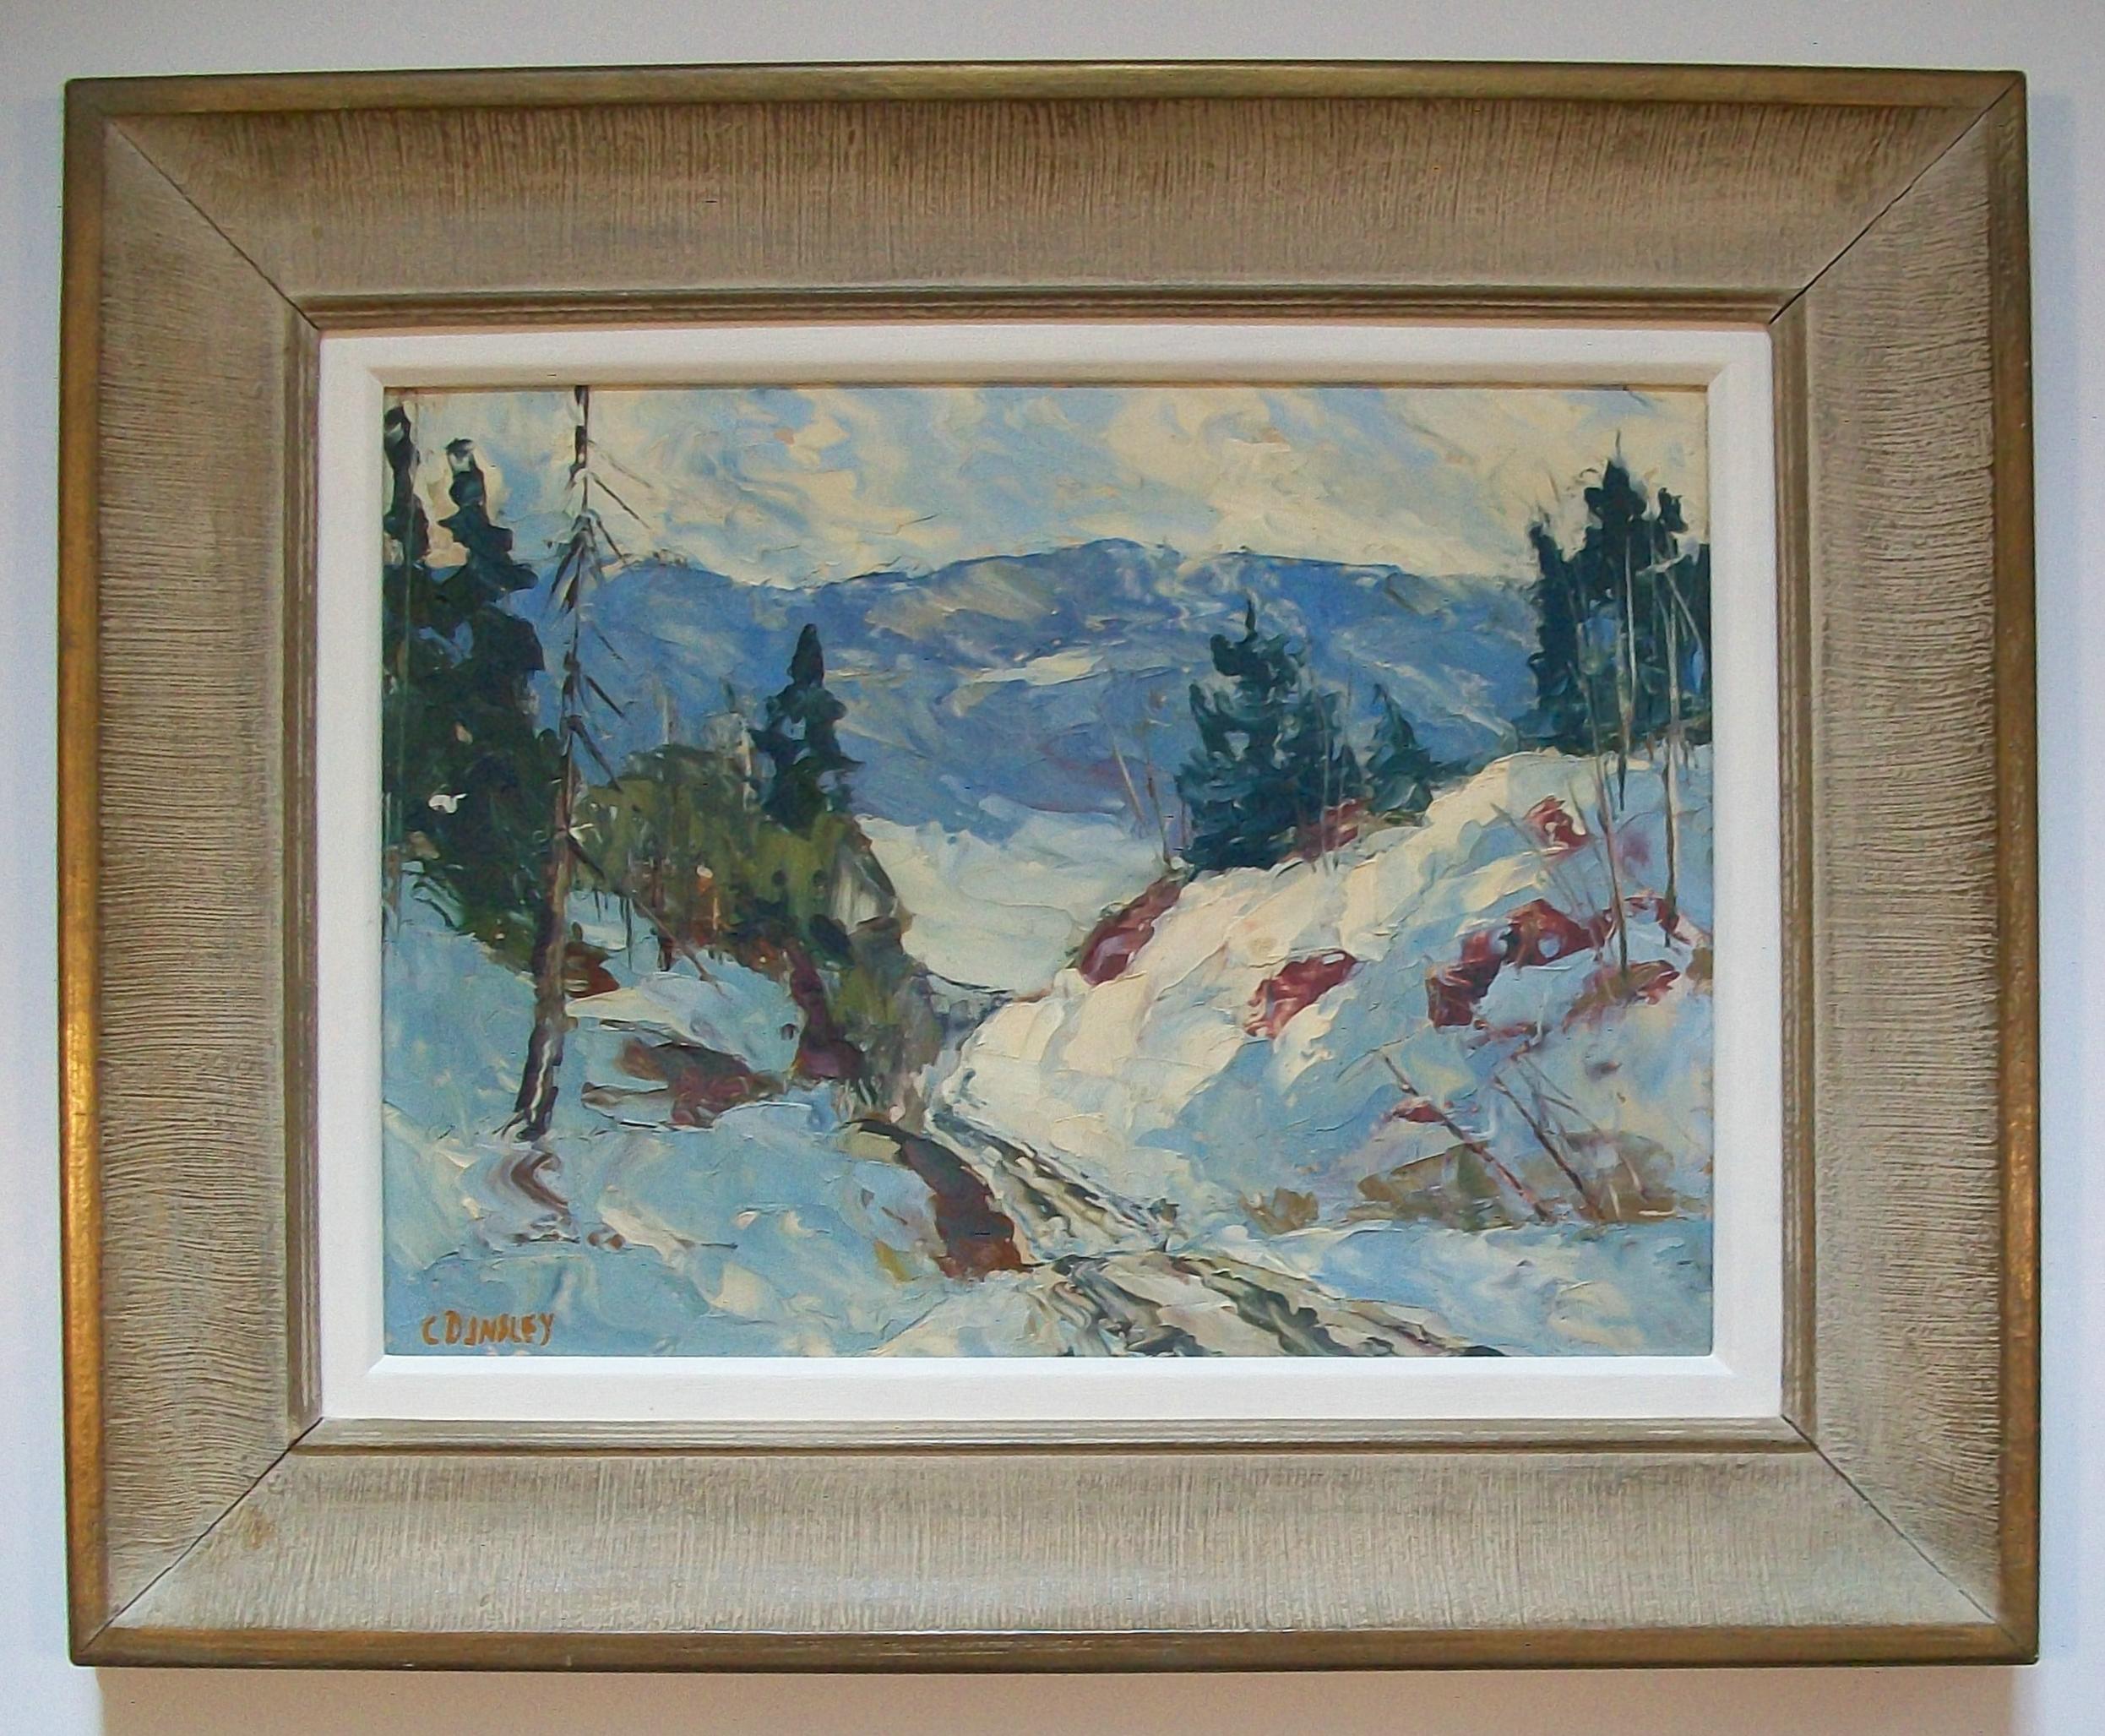 Softwood C. D. INSLEY - 'Late Afternoon Snow' - Framed Oil Painting - Canada - Circa 1960 For Sale